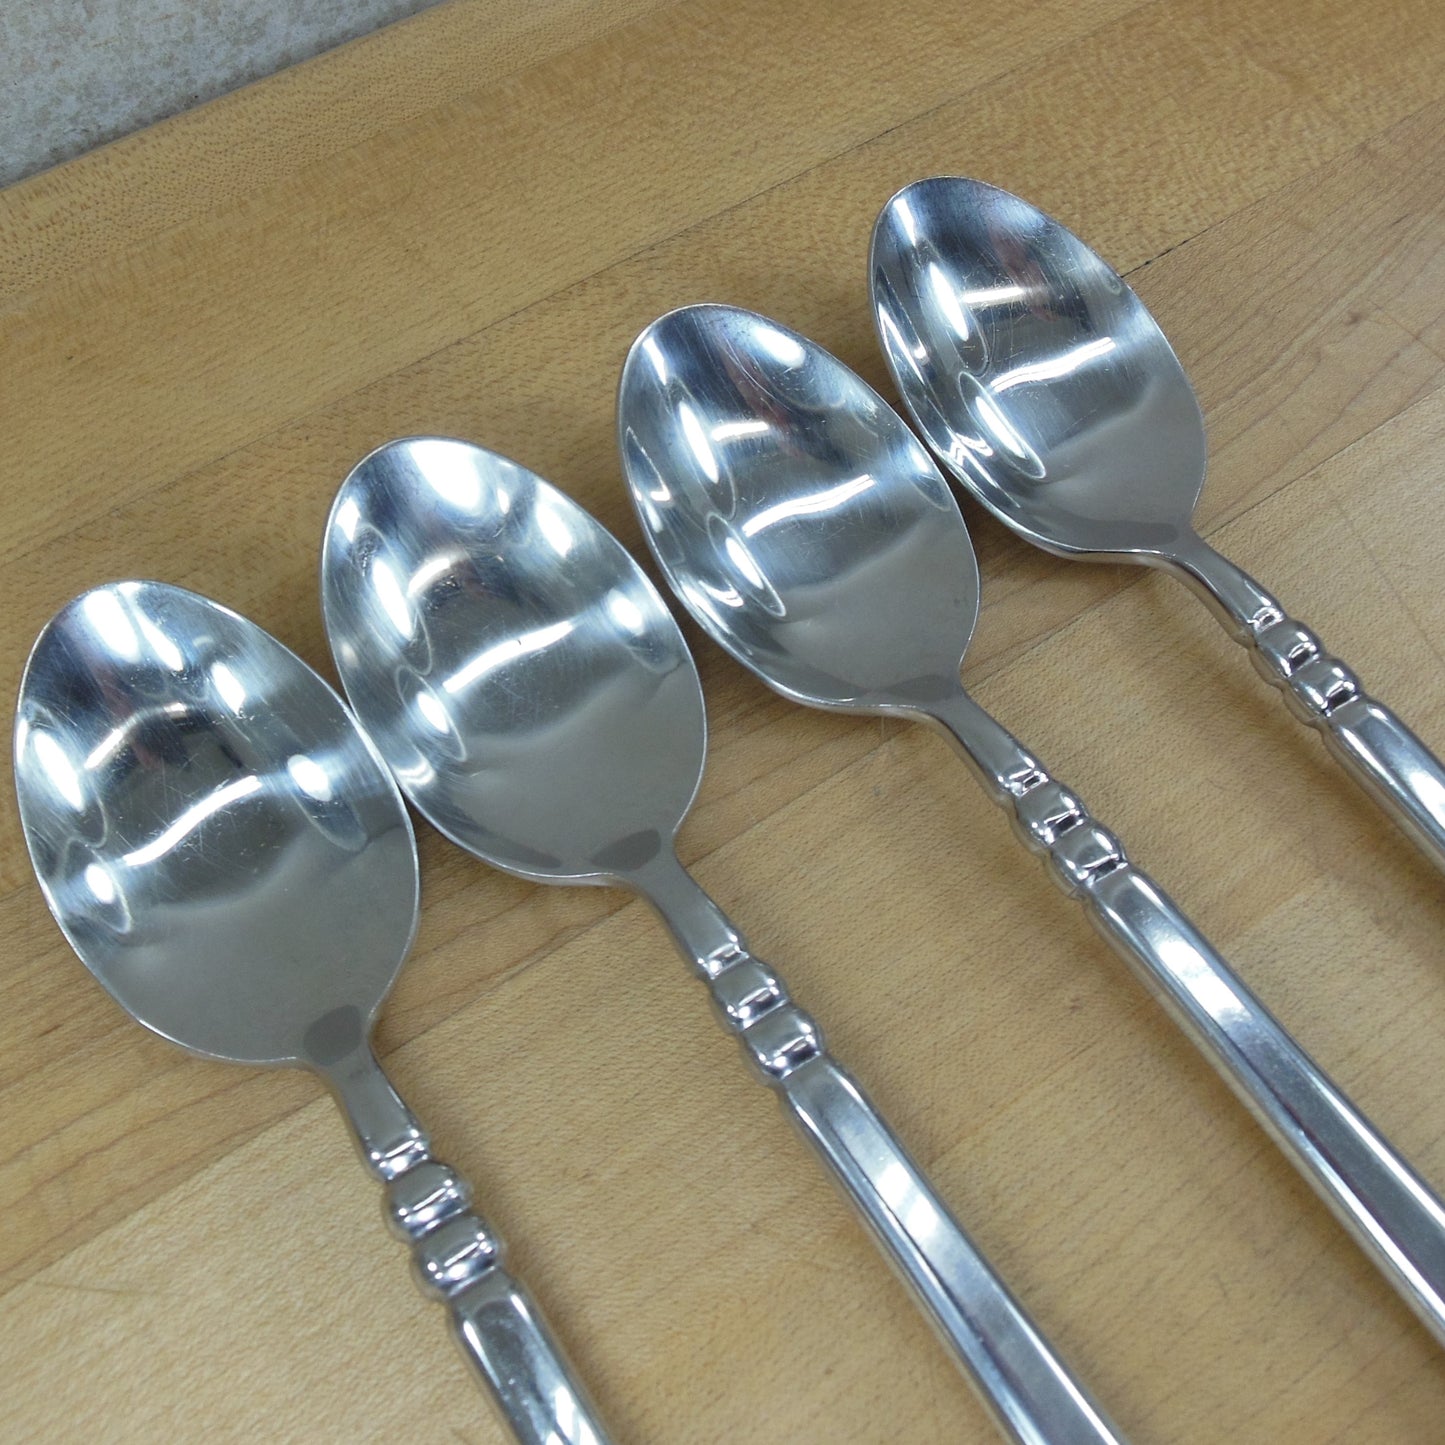 Oneida China Tortola Stainless Flatware - 4 Place/Soup Spoons Used